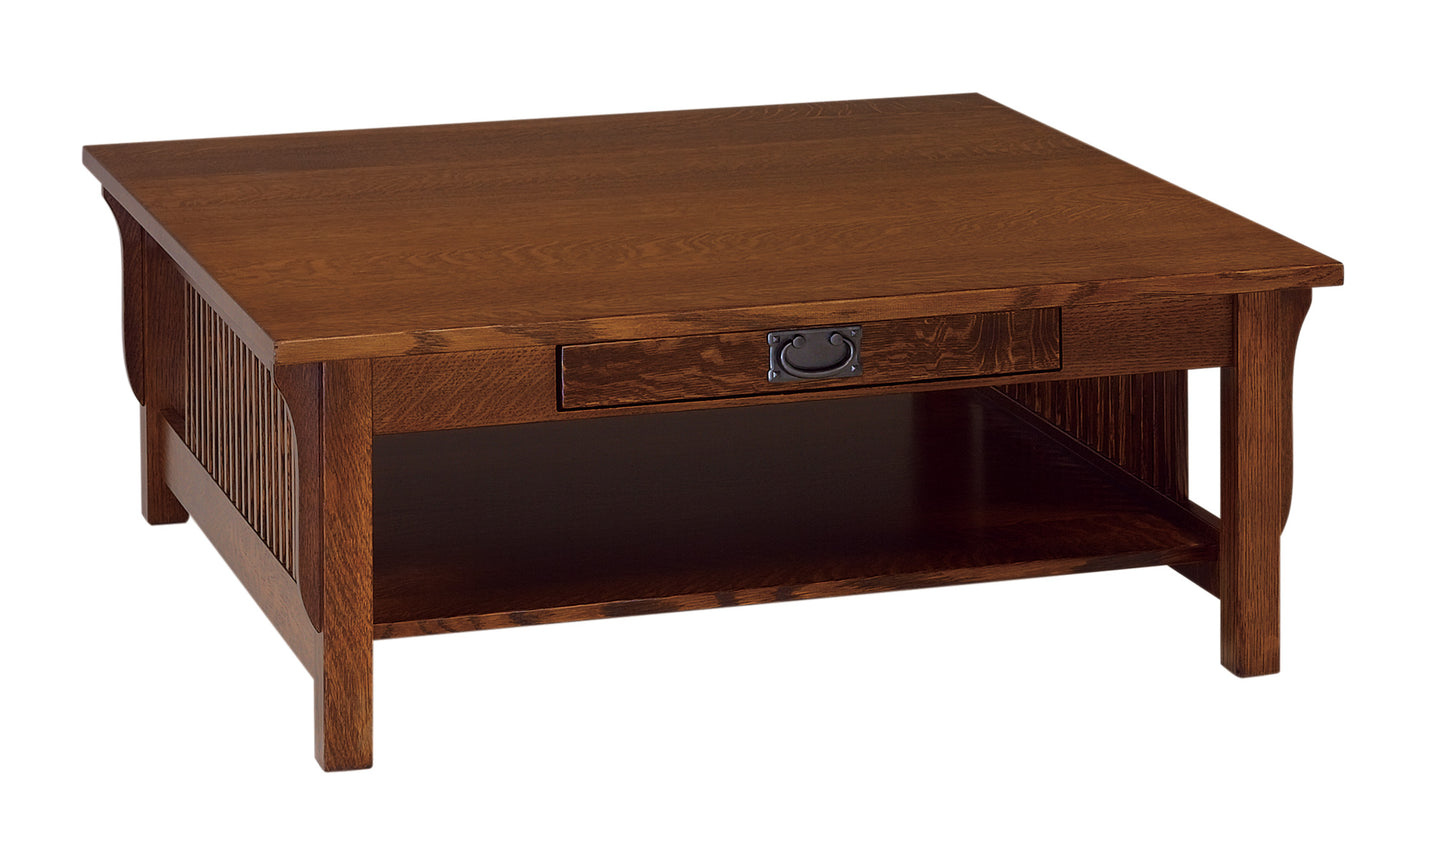 Landmark Mission Square Coffee Table with Drawer